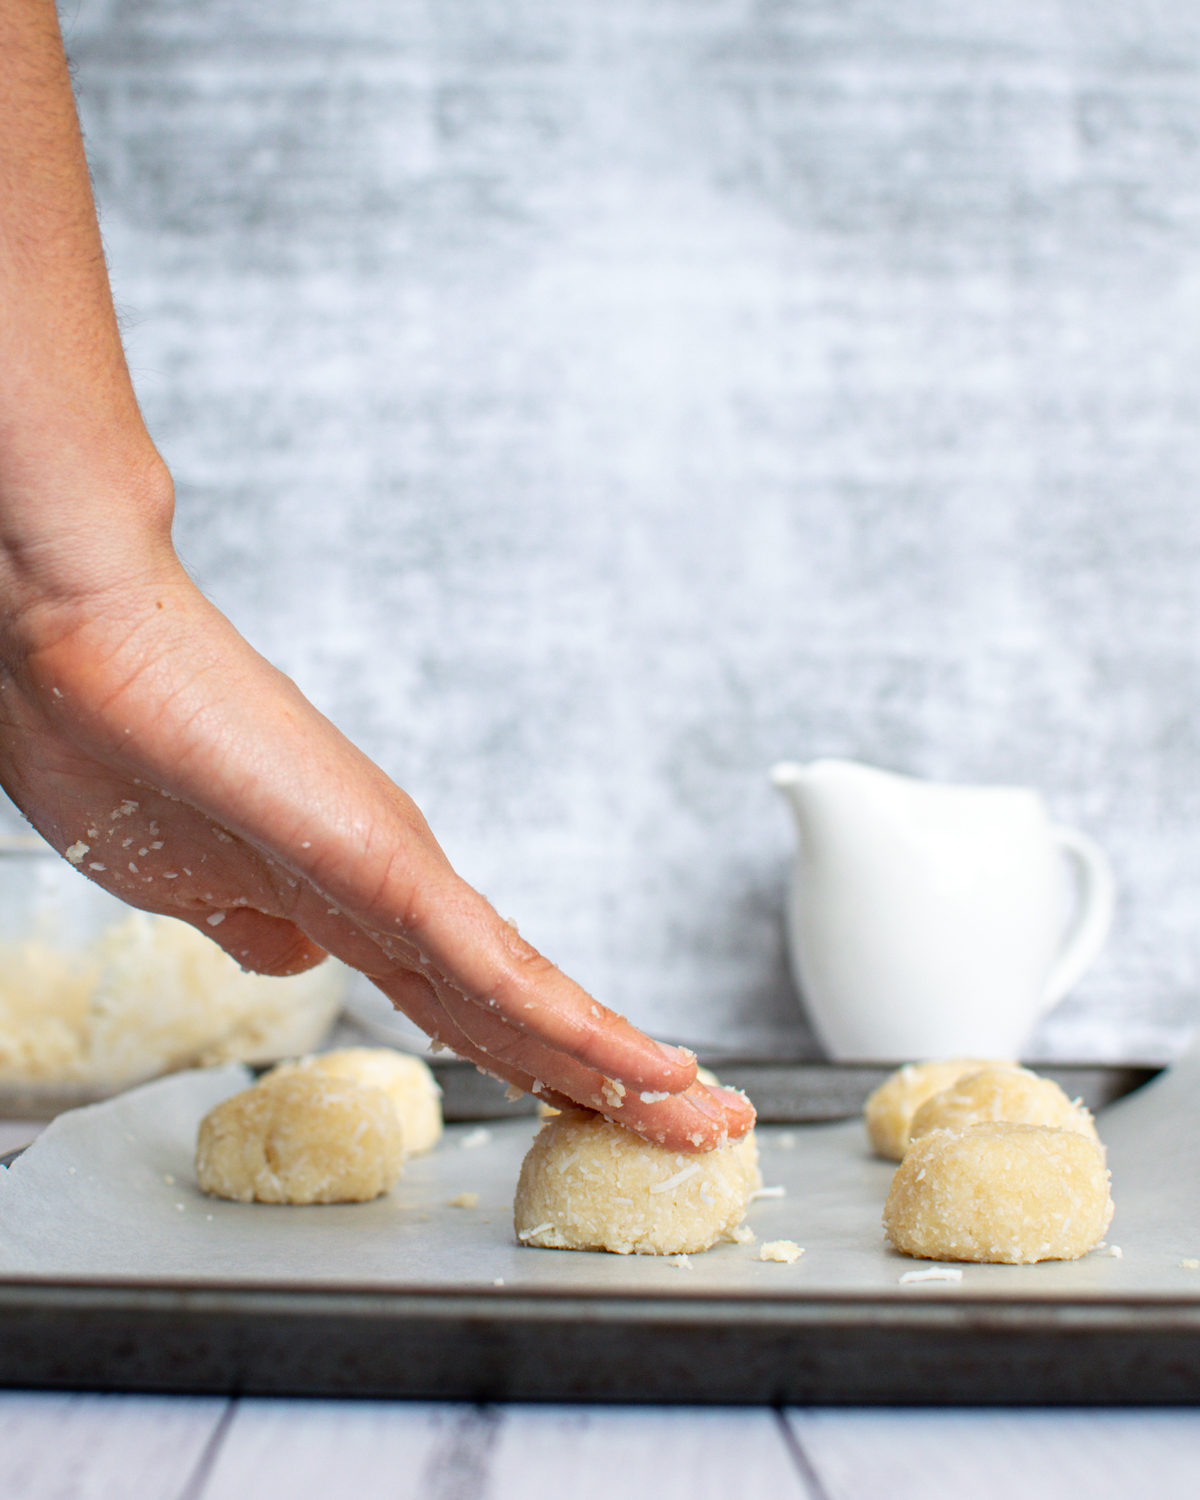 Picture of dough rolled in balls on a baking sheet lined with parchment paper and a hand pressing down on a ball.